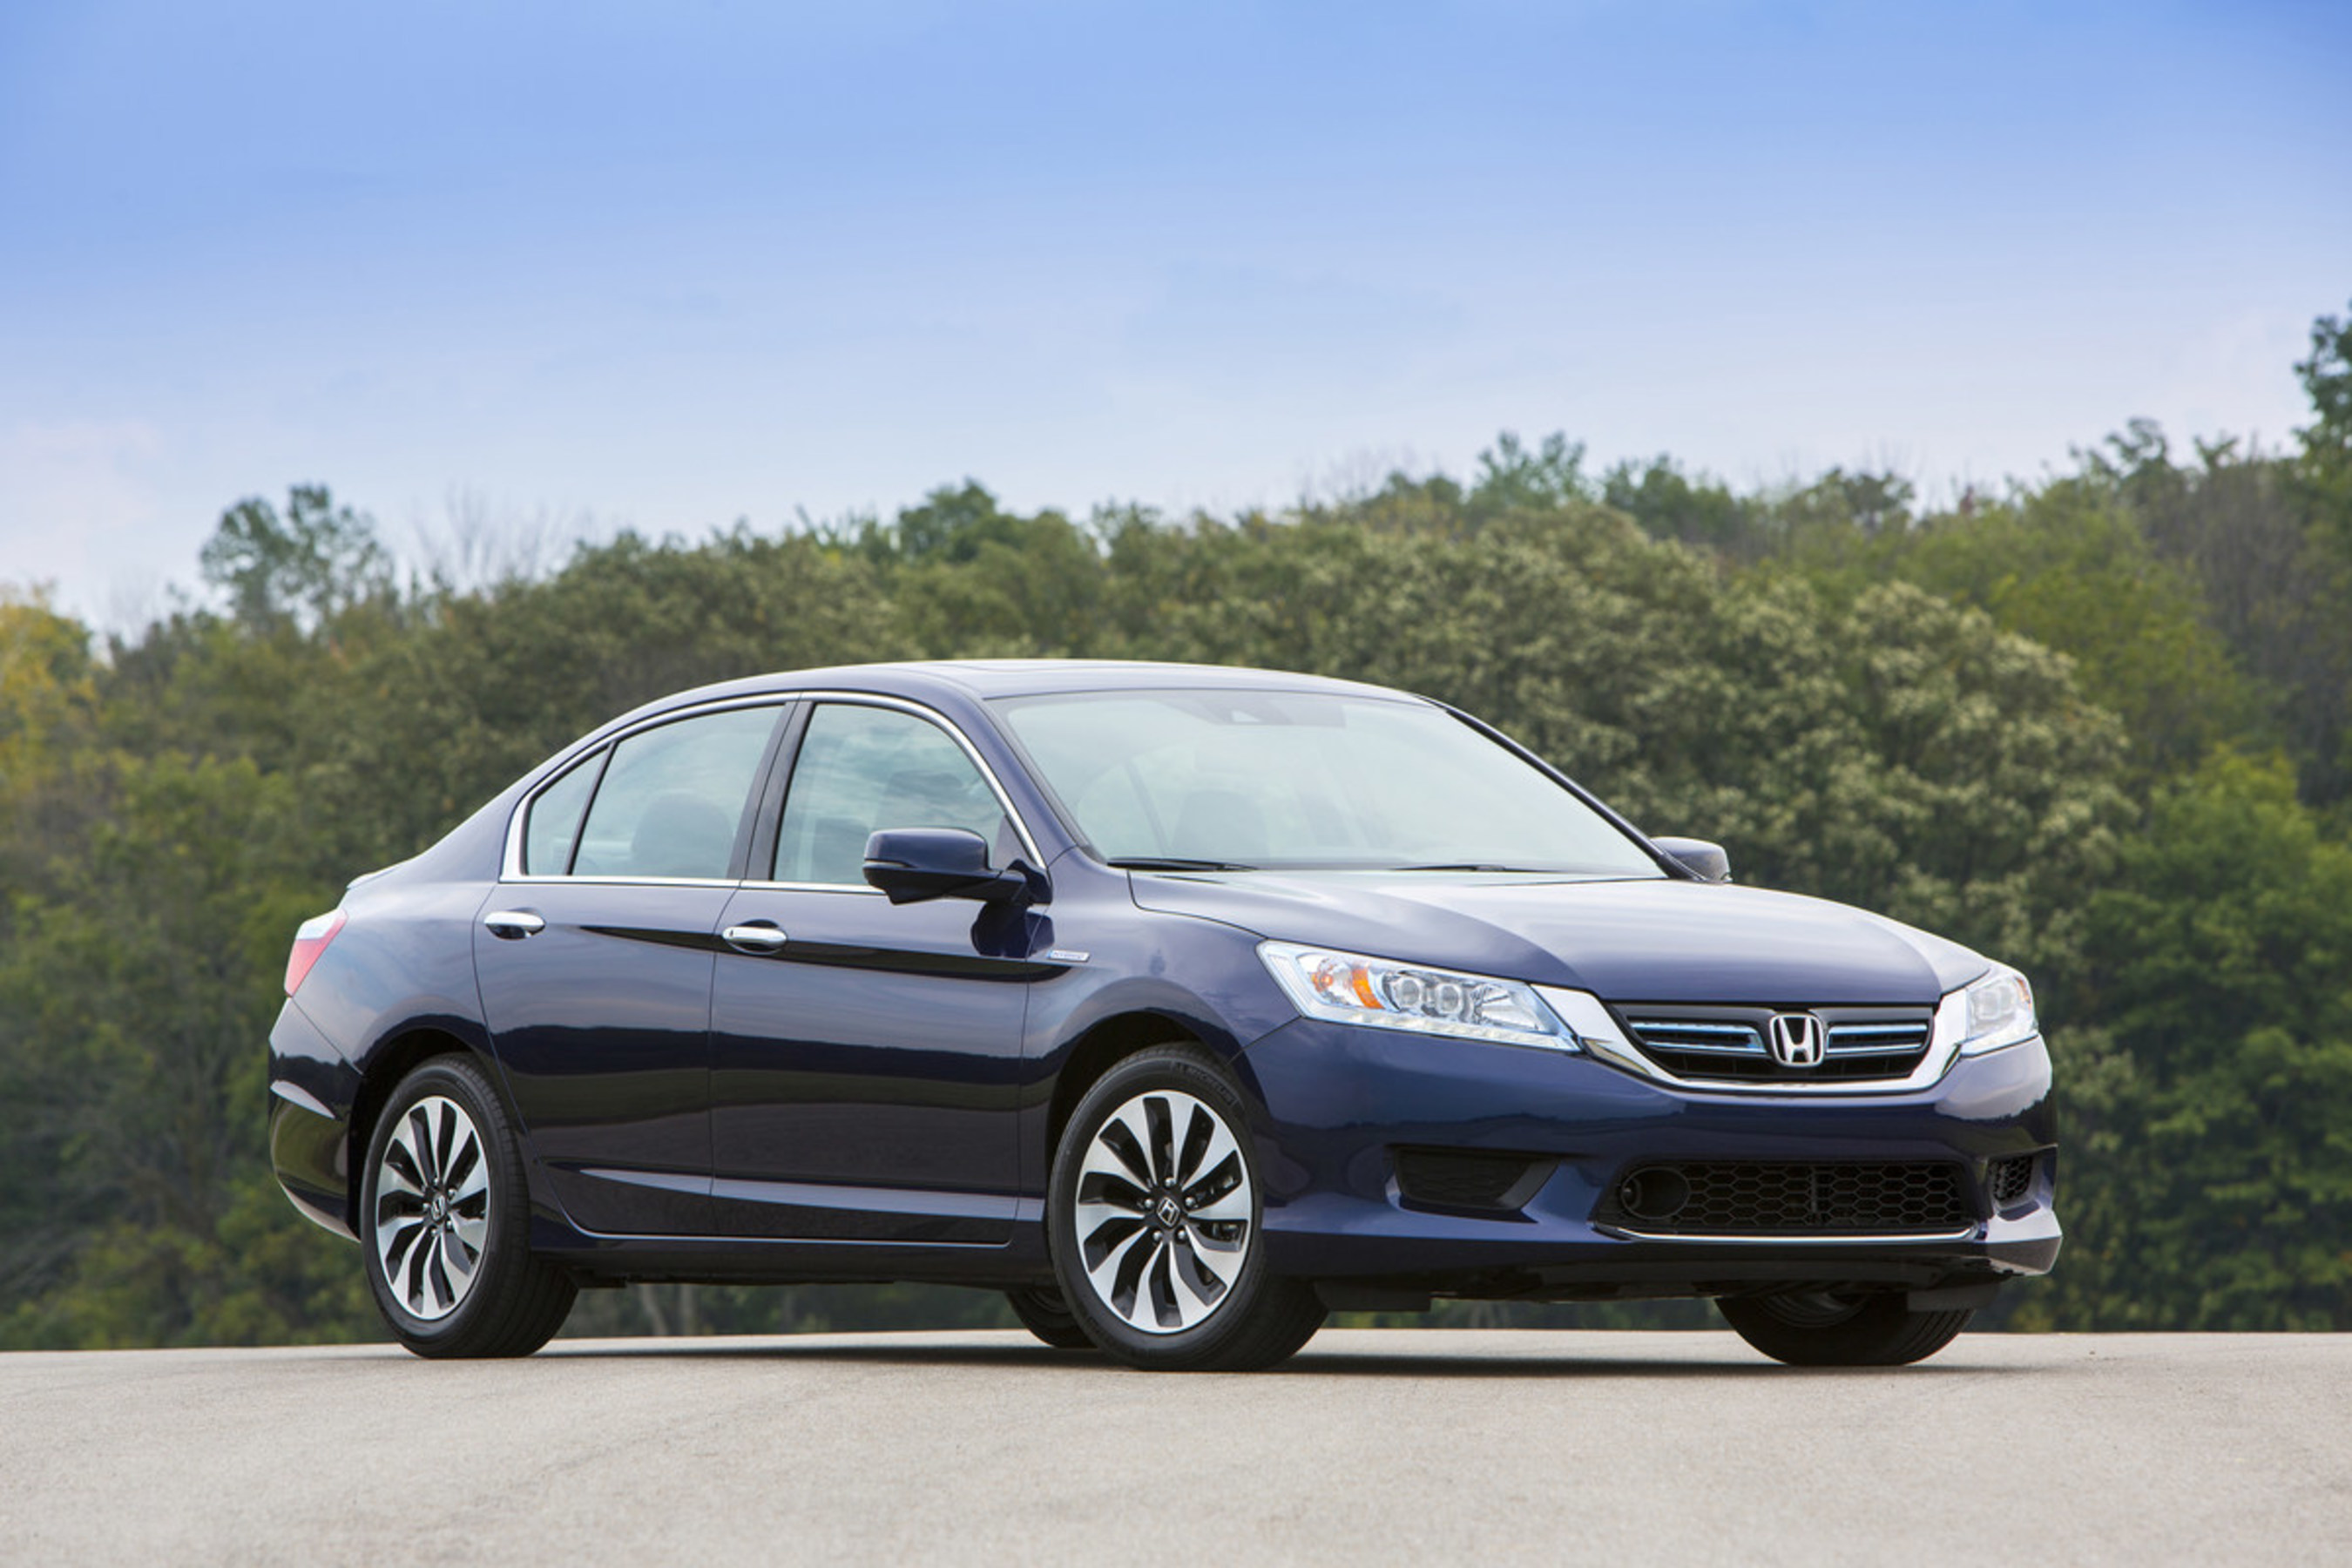 50-MPG Honda Accord Hybrid Named to KBB.com's 10 Best Green Cars List For Second Year in a Row